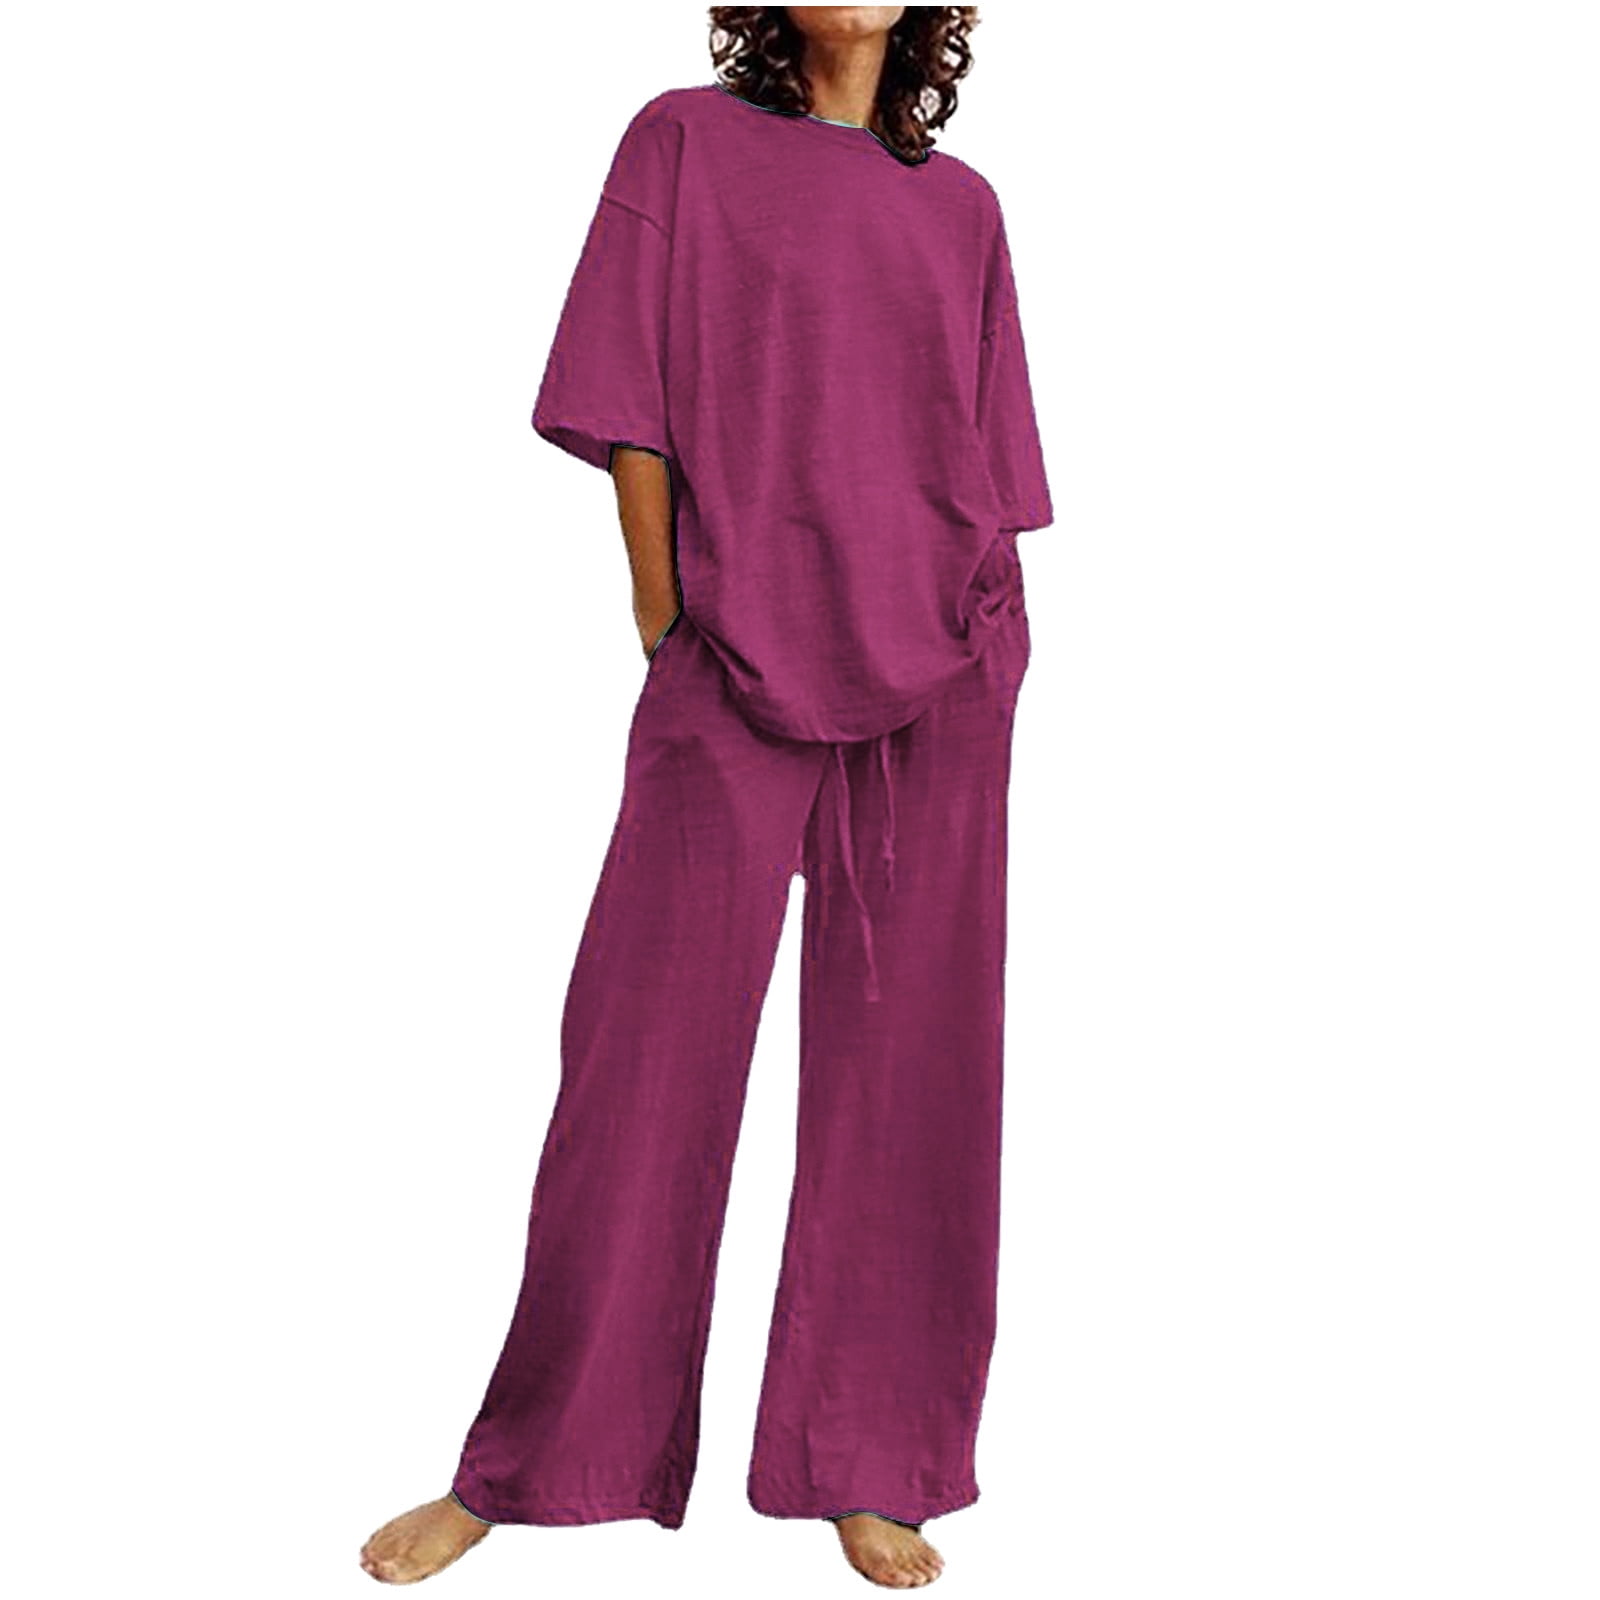 Buy Summer Co-ord Set, Harem Pants Set, Women Two Piece Outfit, Two Piece  Linen Set With Sleeveless Top VIOLET SE1023LE Online in India 